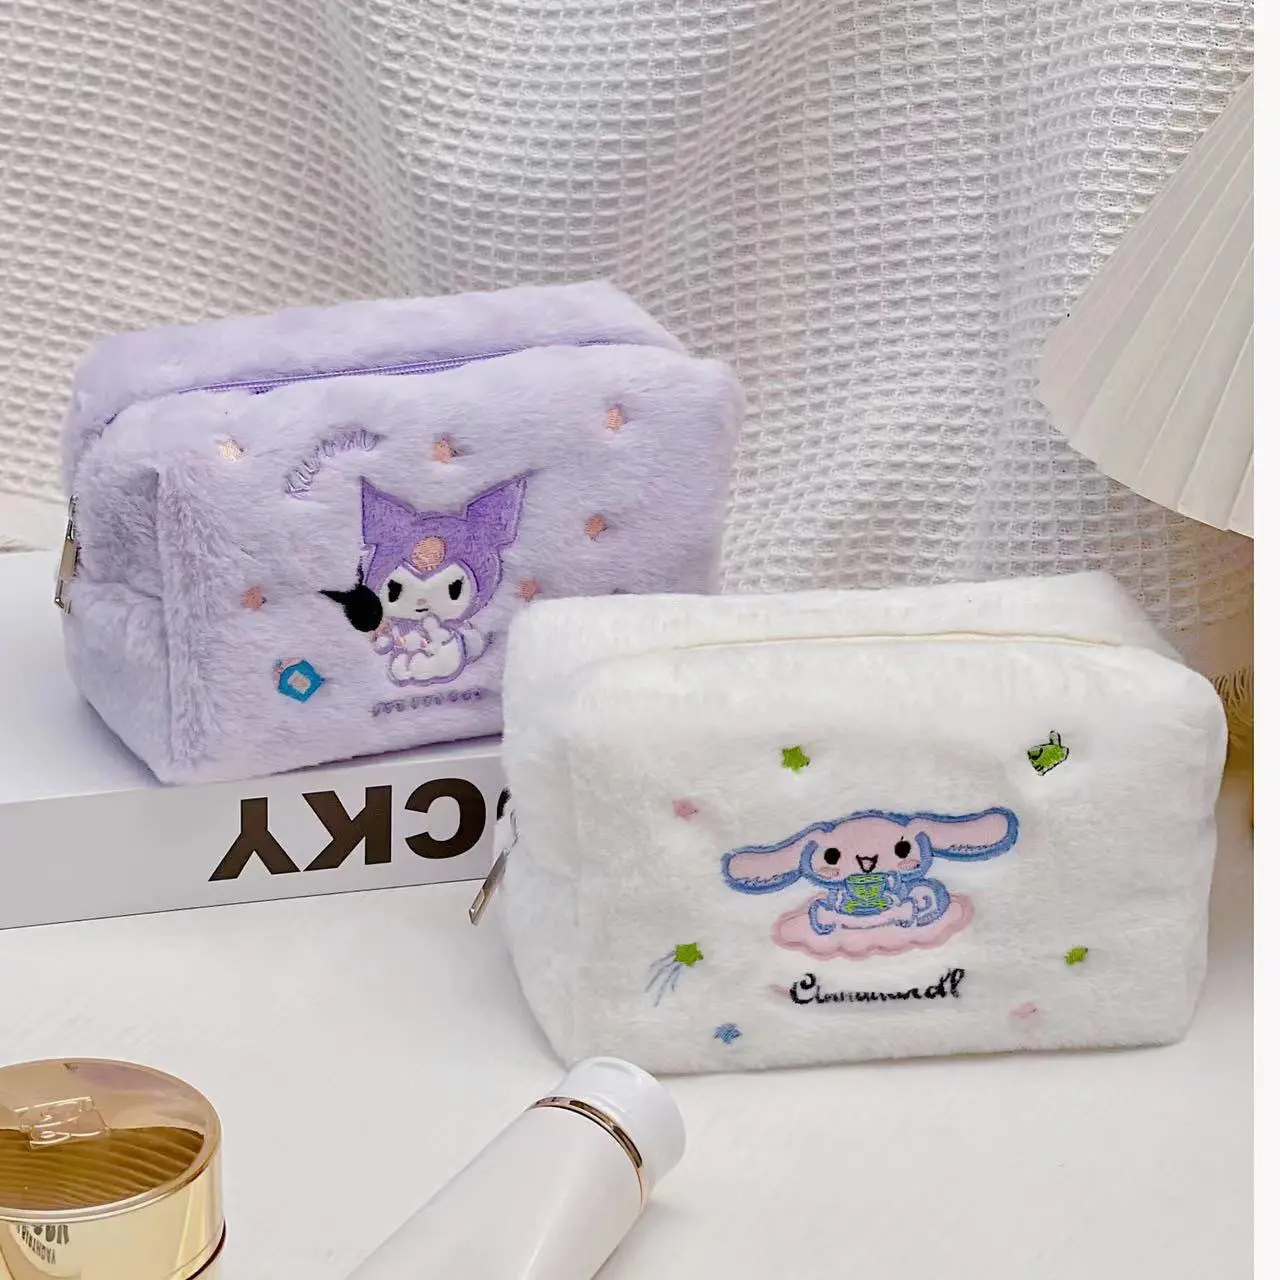 Polyester Men Business Portable Storage Bag Toiletries Organizer Women Travel Cosmetic Bag Hanging Waterproof Wash Pouch